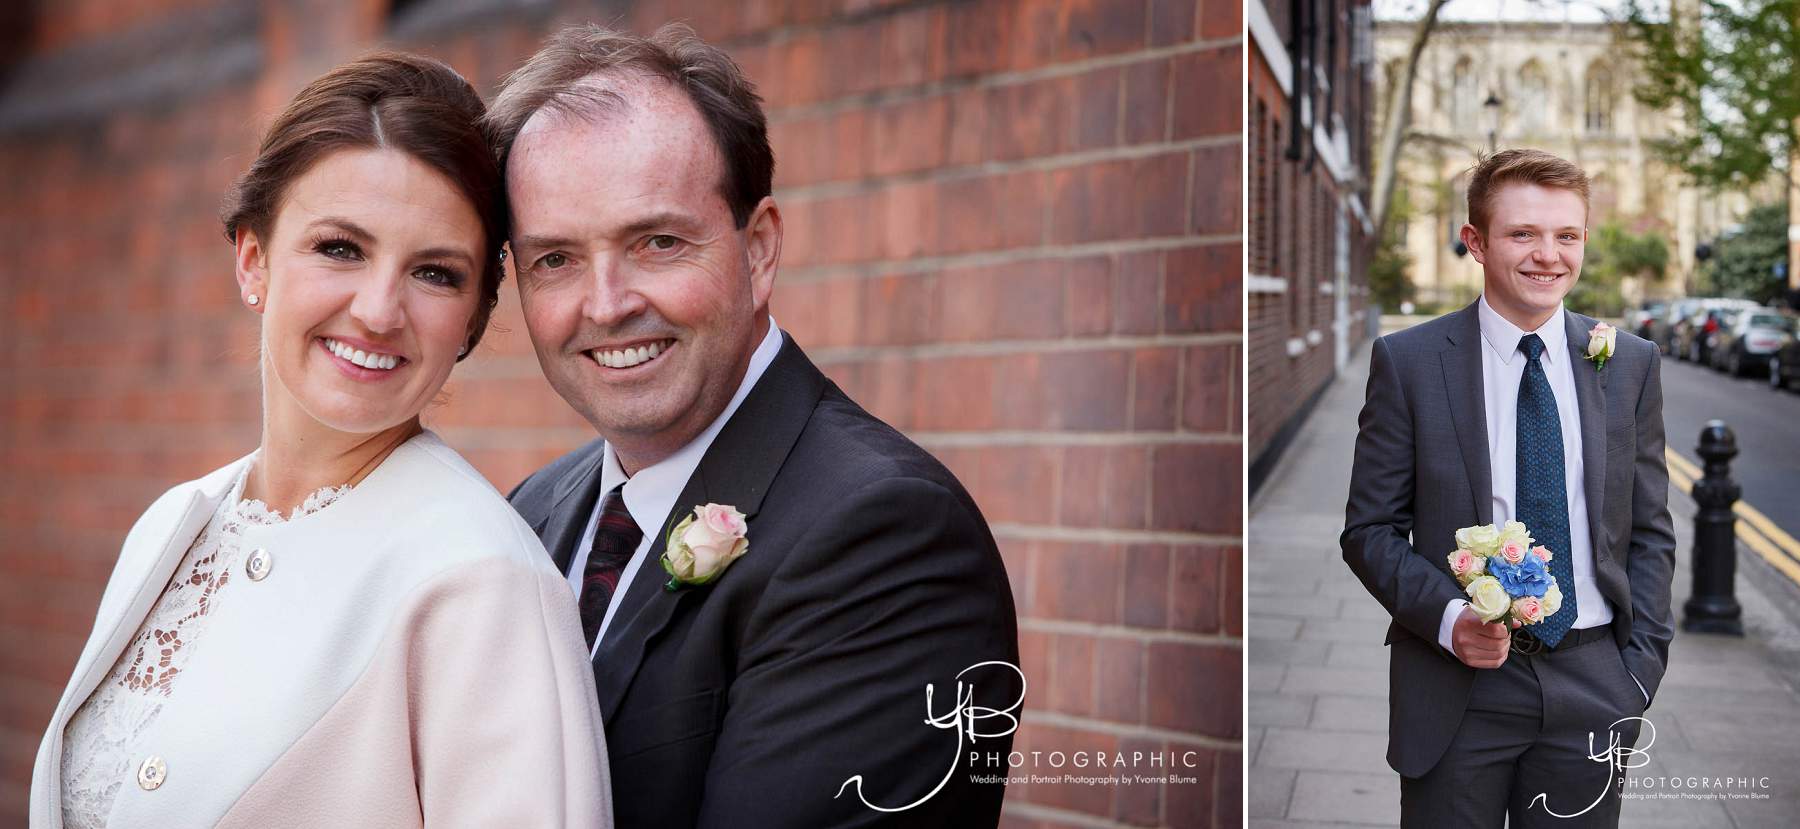 Chelsea Wedding Portraits by YBPHOTOGRAPHIC